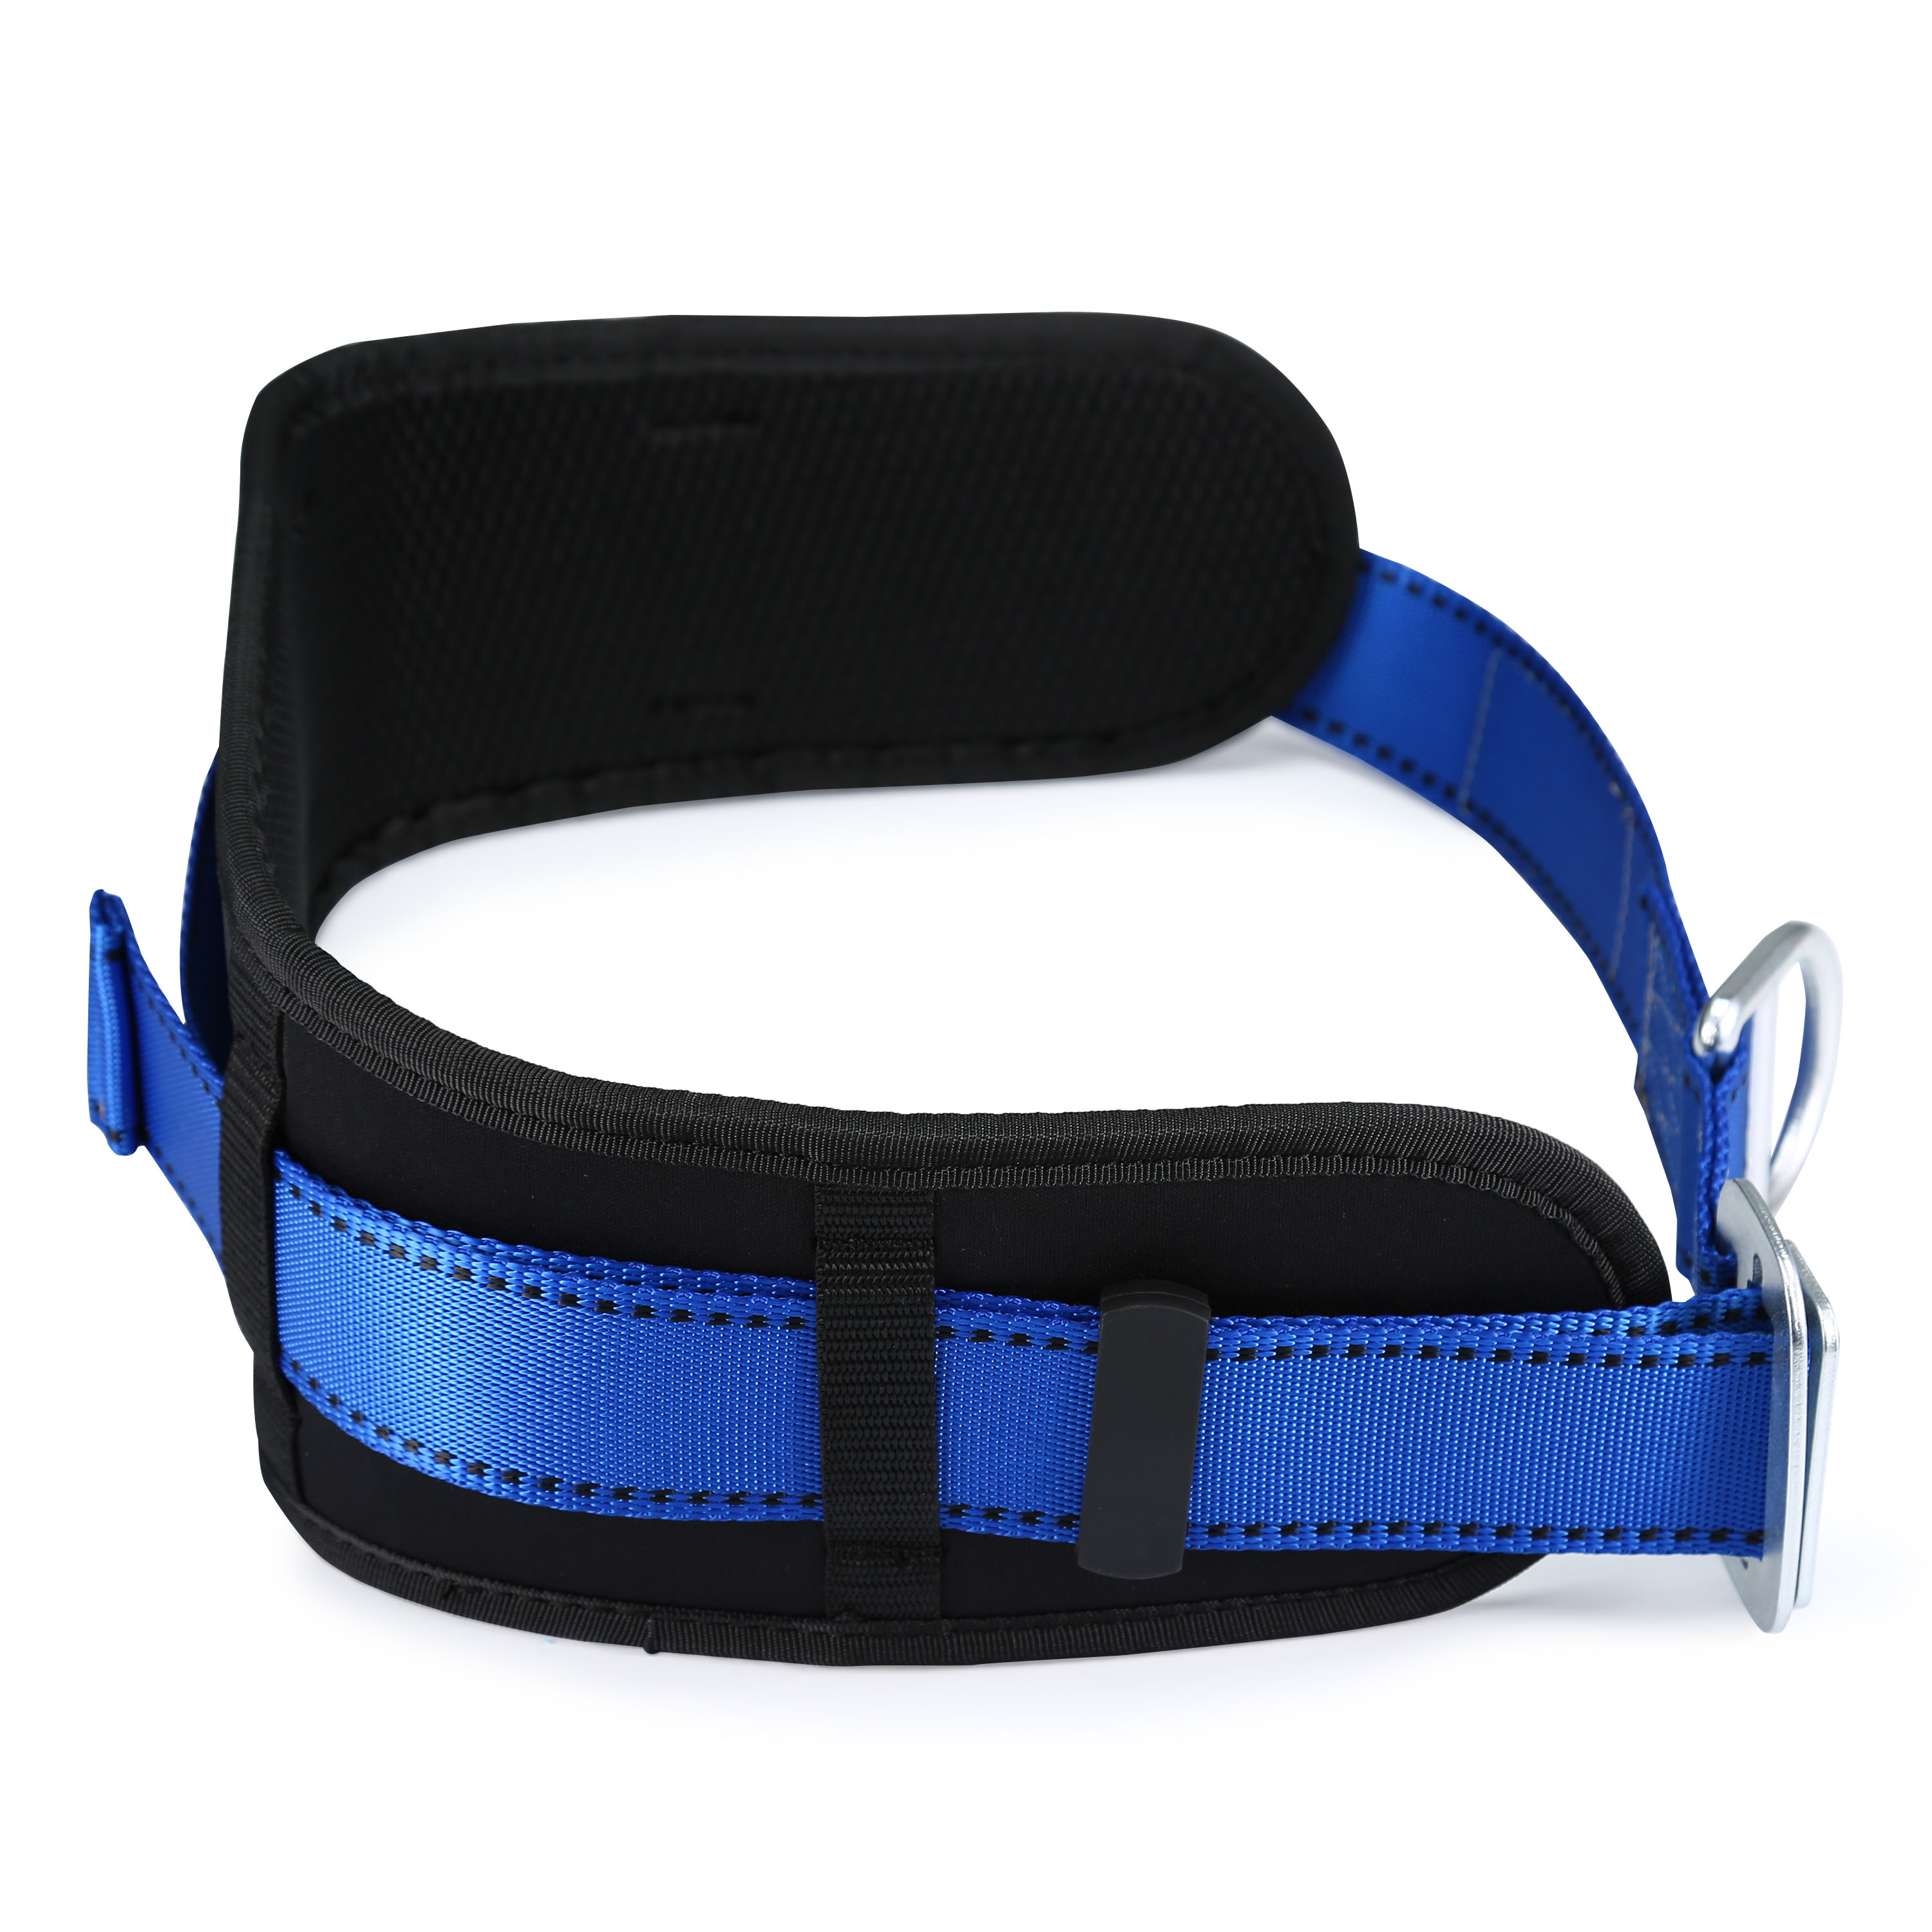 Body Belt w/ Waist Pad Side D-Rings Protective Equipment Safety Climbing Harness